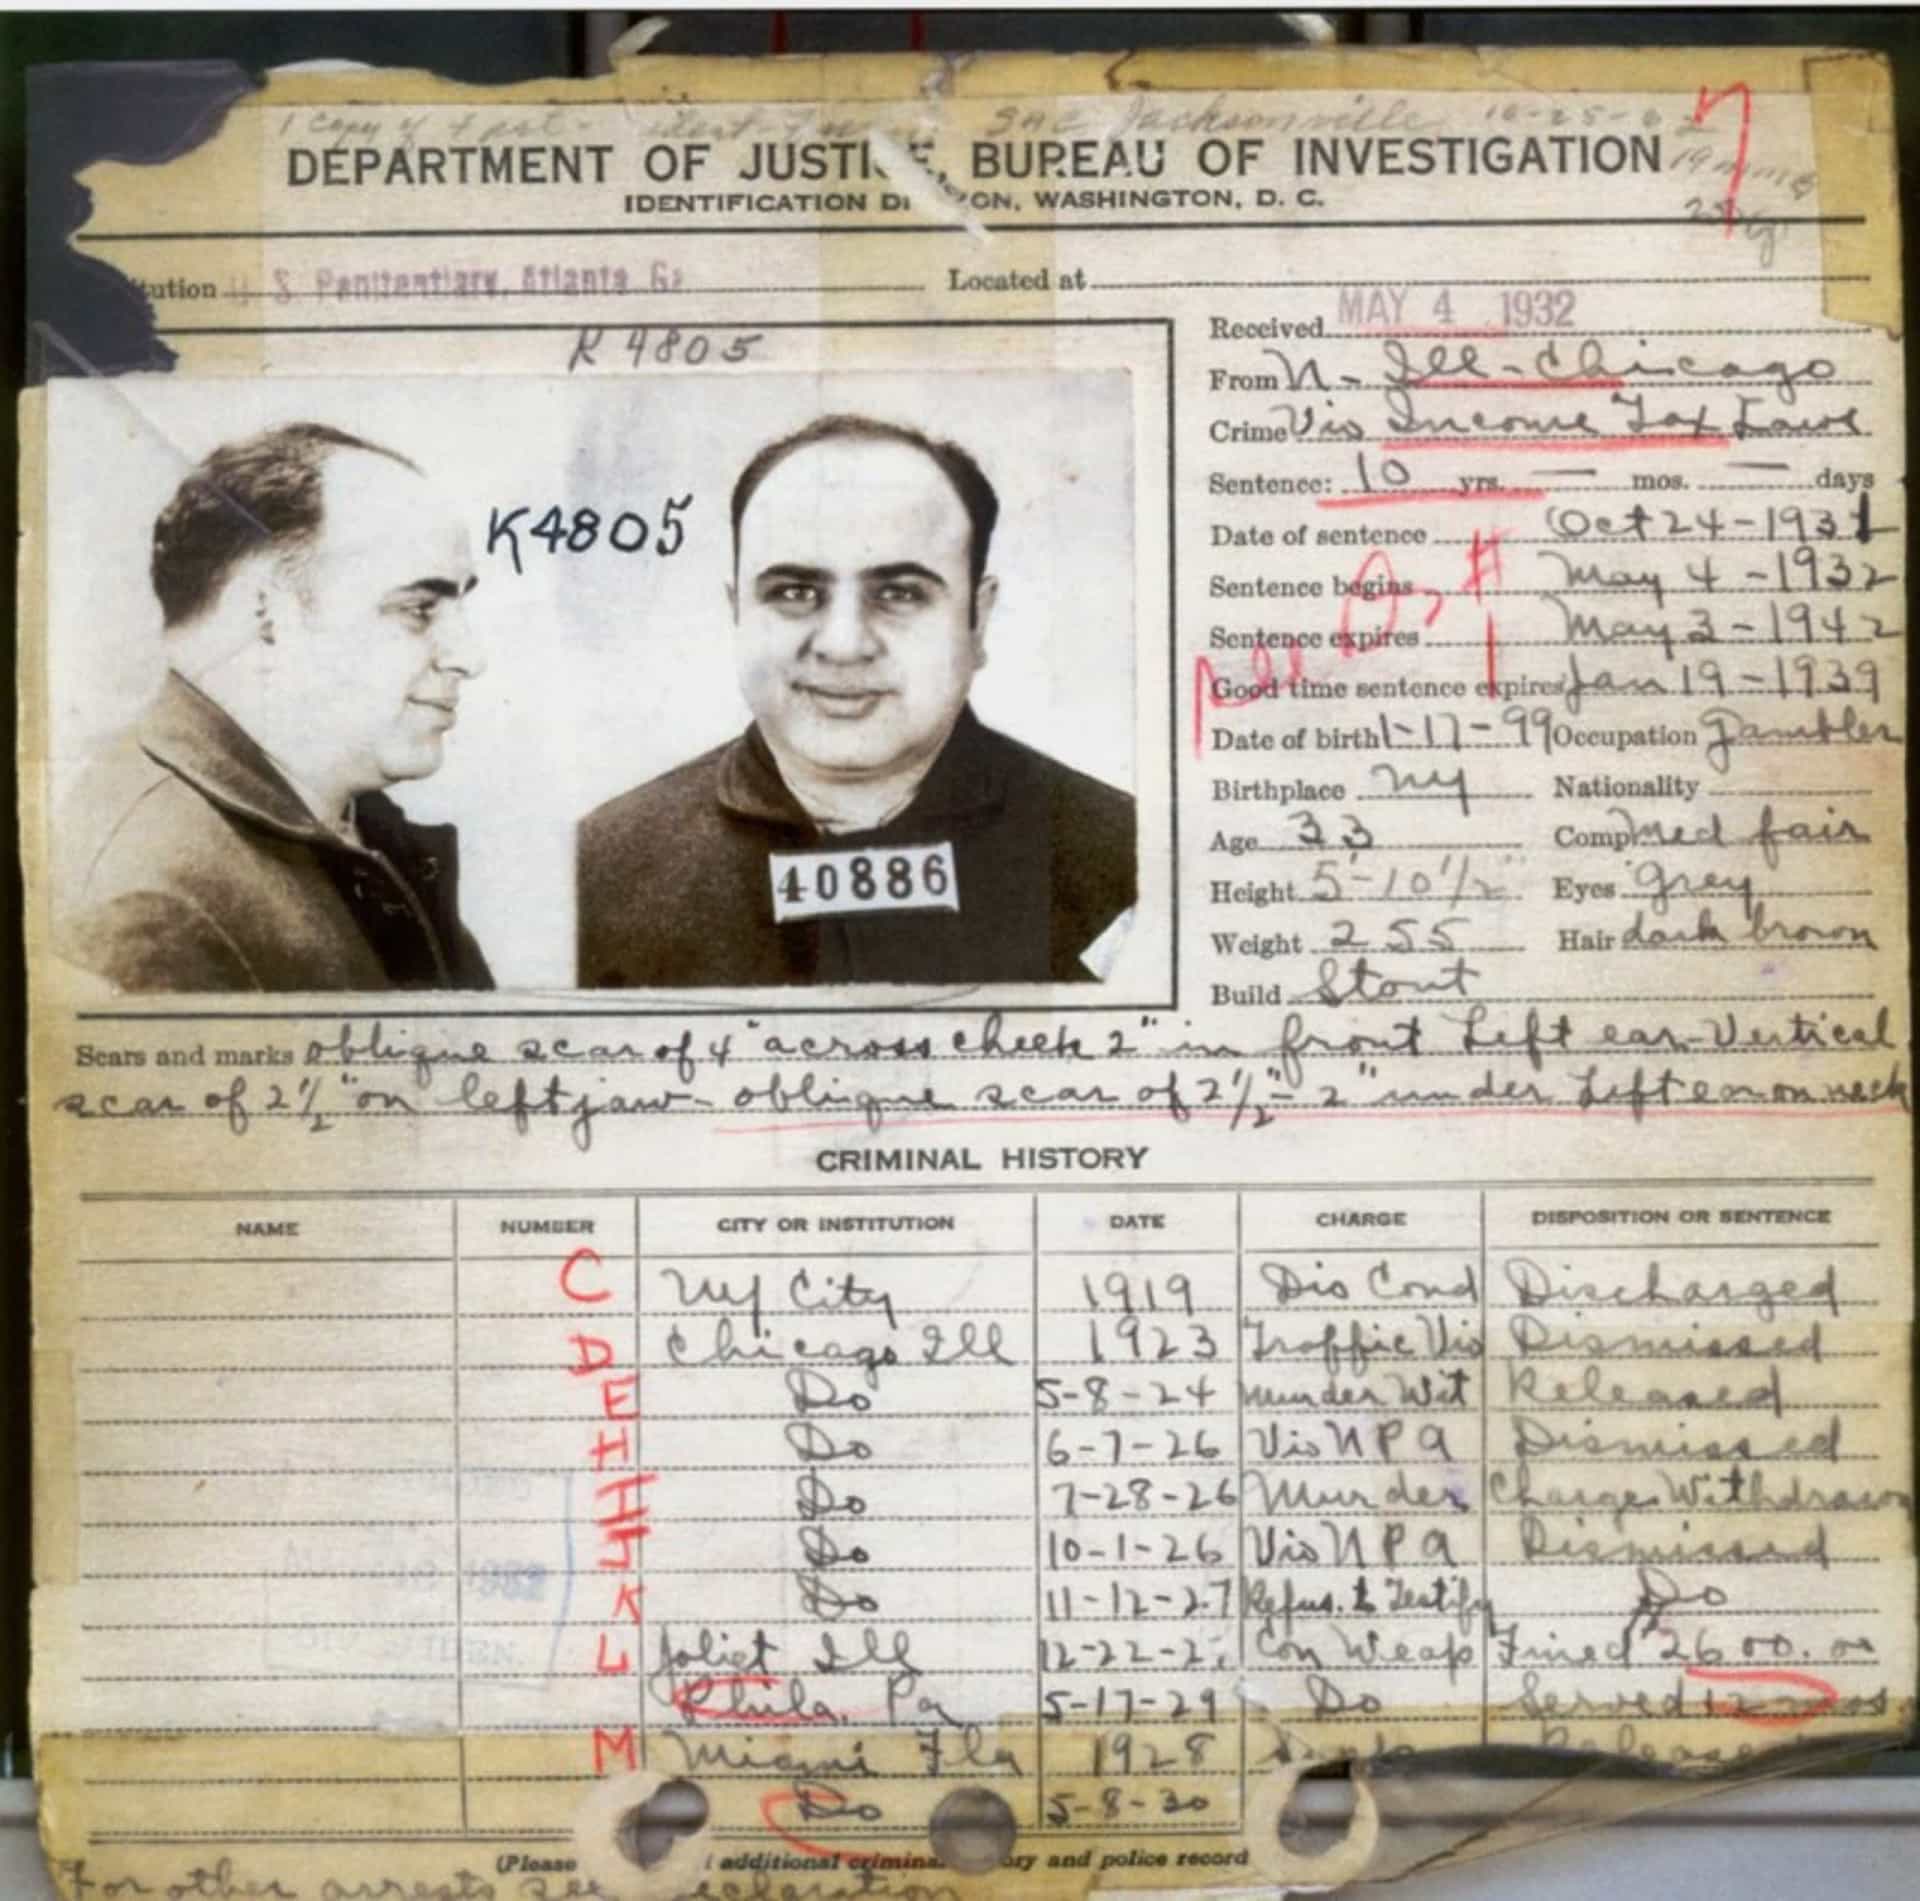 <p>Capone had a knack for avoiding justice, as his FBI criminal record of 1932 testifies. Most of the criminal charges were discharged or dismissed due to lack of evidence or after buying out crooked officials.</p>